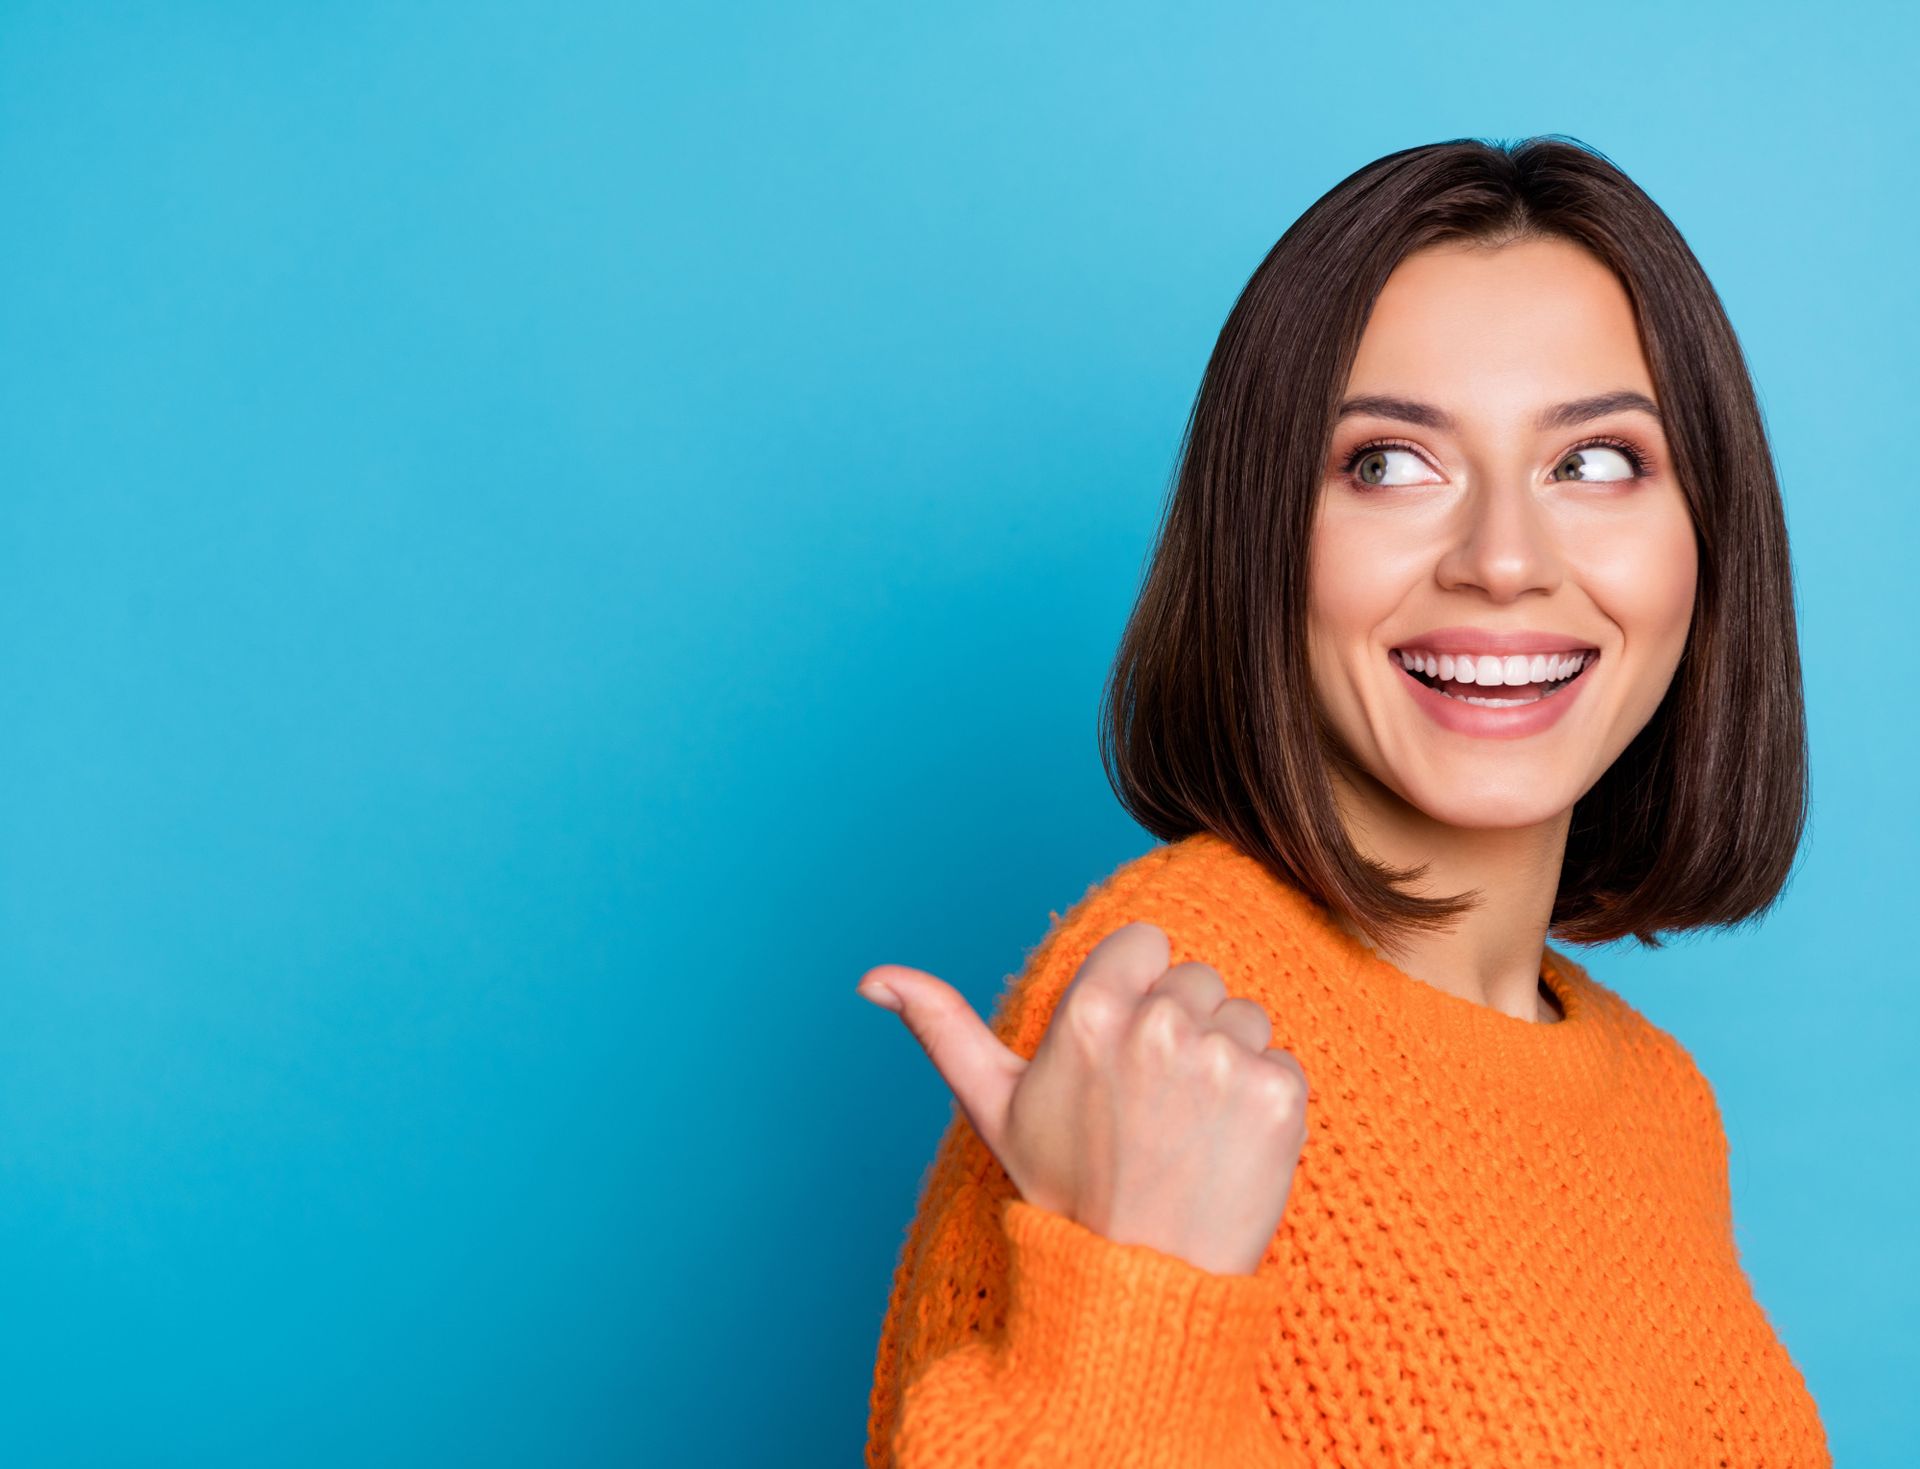 a woman in an orange sweater is giving a thumbs up